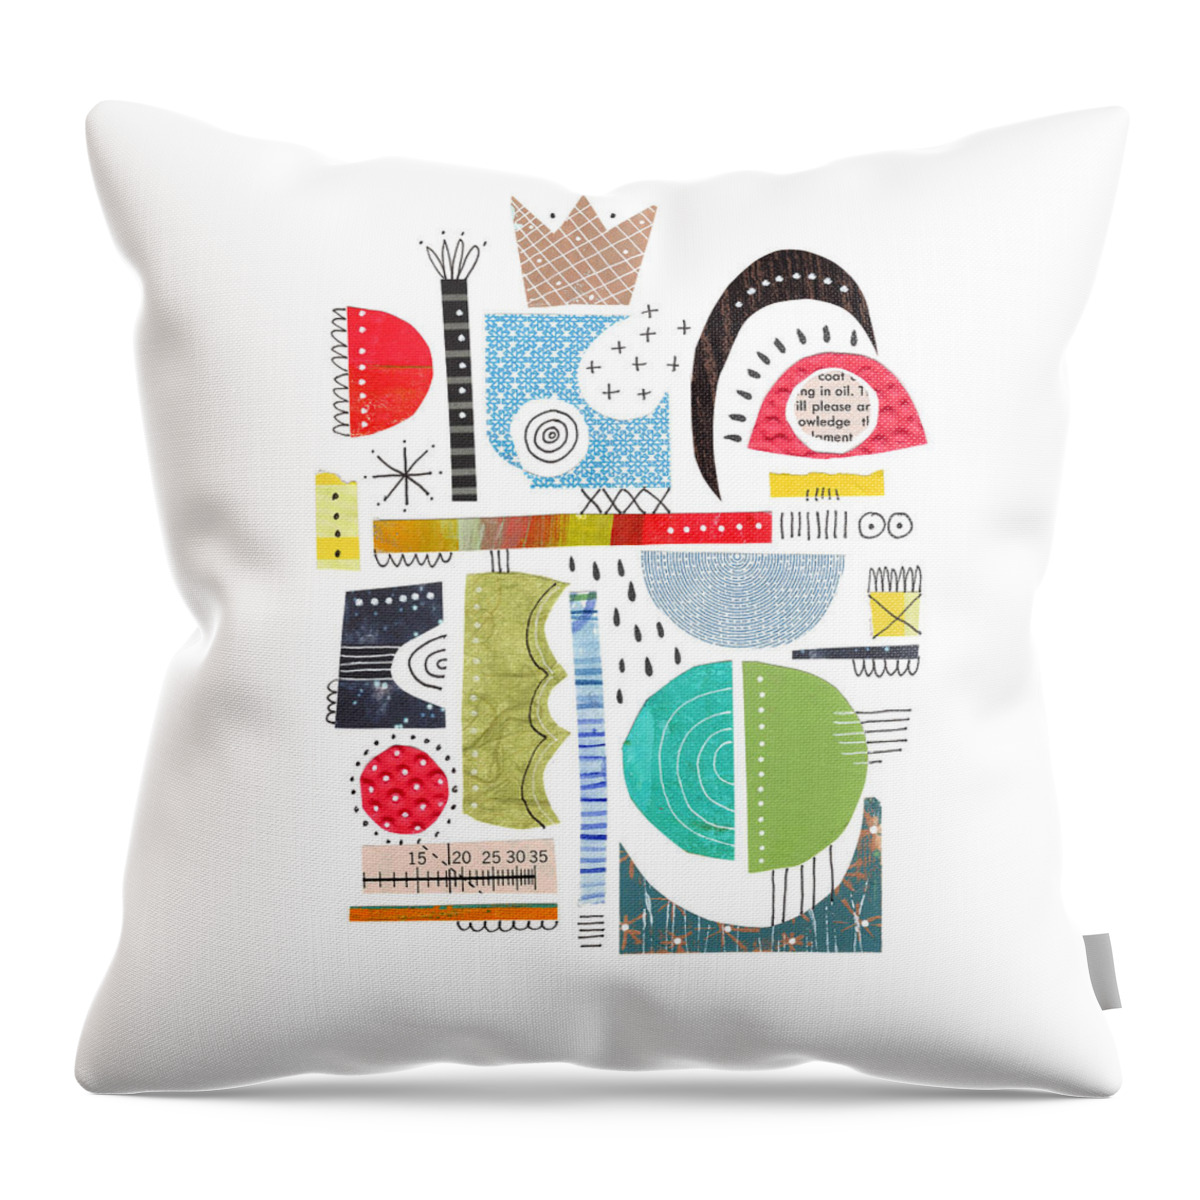 Collage Throw Pillow featuring the mixed media Le Roi Couleur by Lucie Duclos